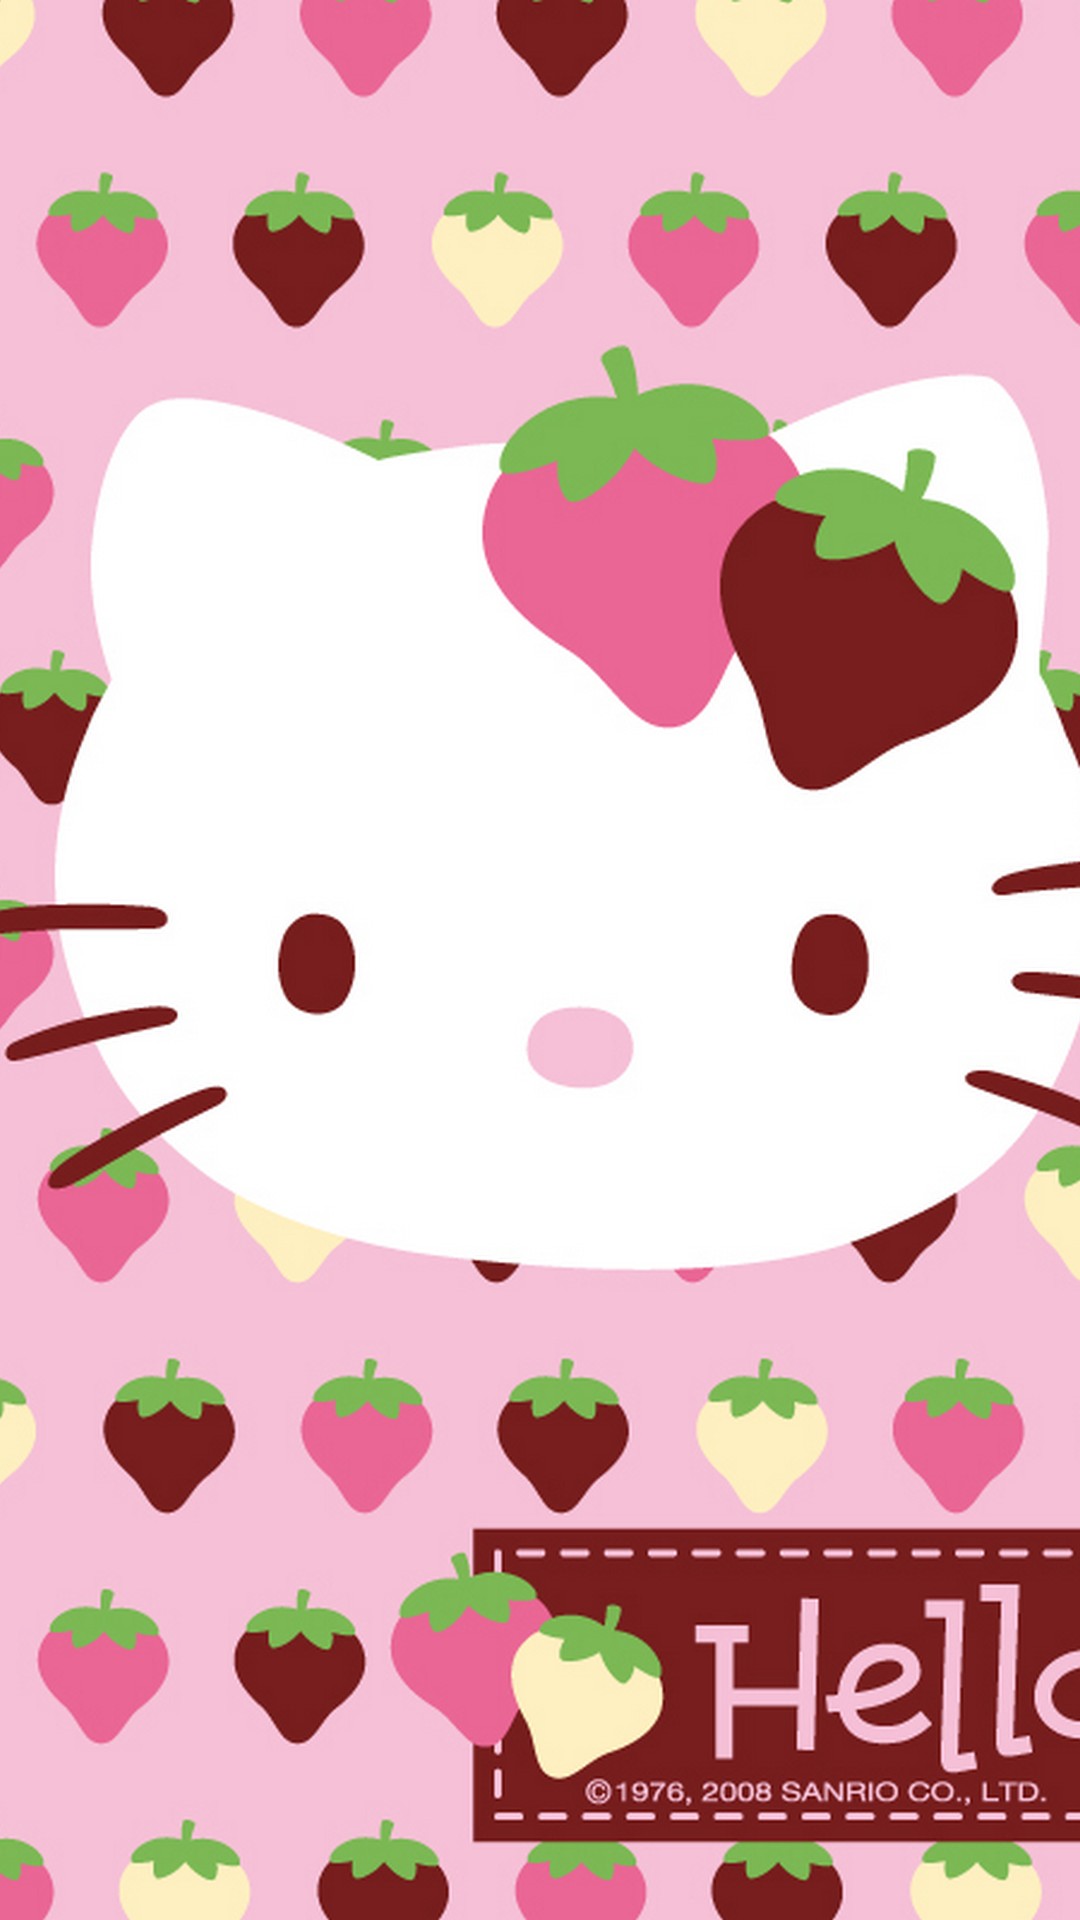 Wallpaper Hello Kitty Pictures Android with image resolution 1080x1920 pixel. You can make this wallpaper for your Android backgrounds, Tablet, Smartphones Screensavers and Mobile Phone Lock Screen